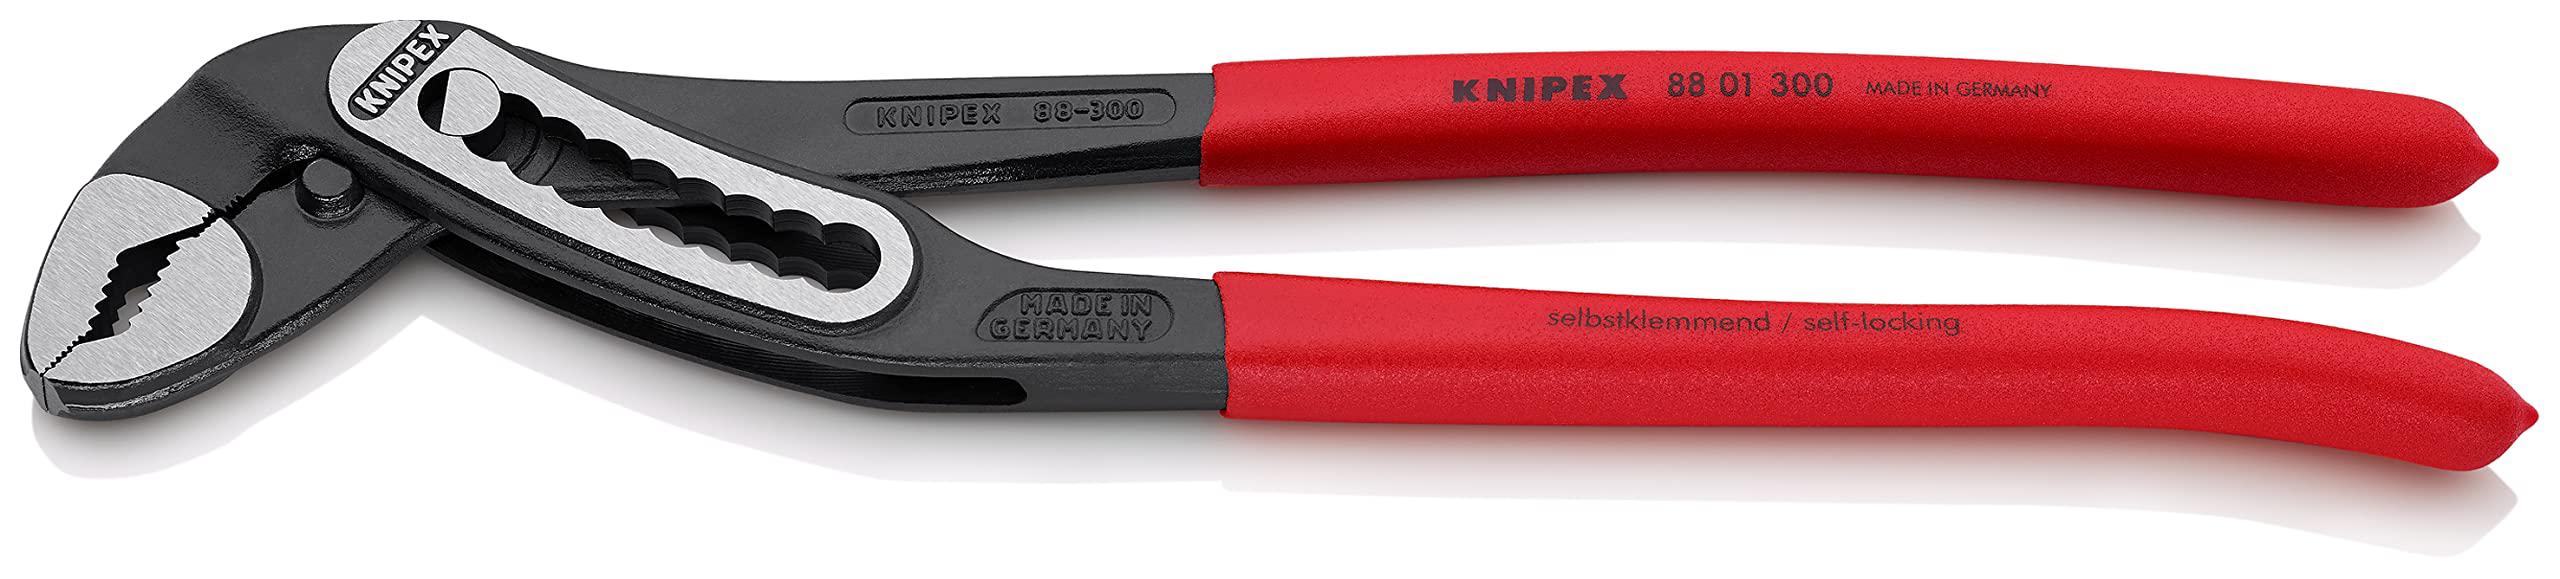 knipex 88 01 300 sb water pump pliers "alligator" 11,81" in blister packaging